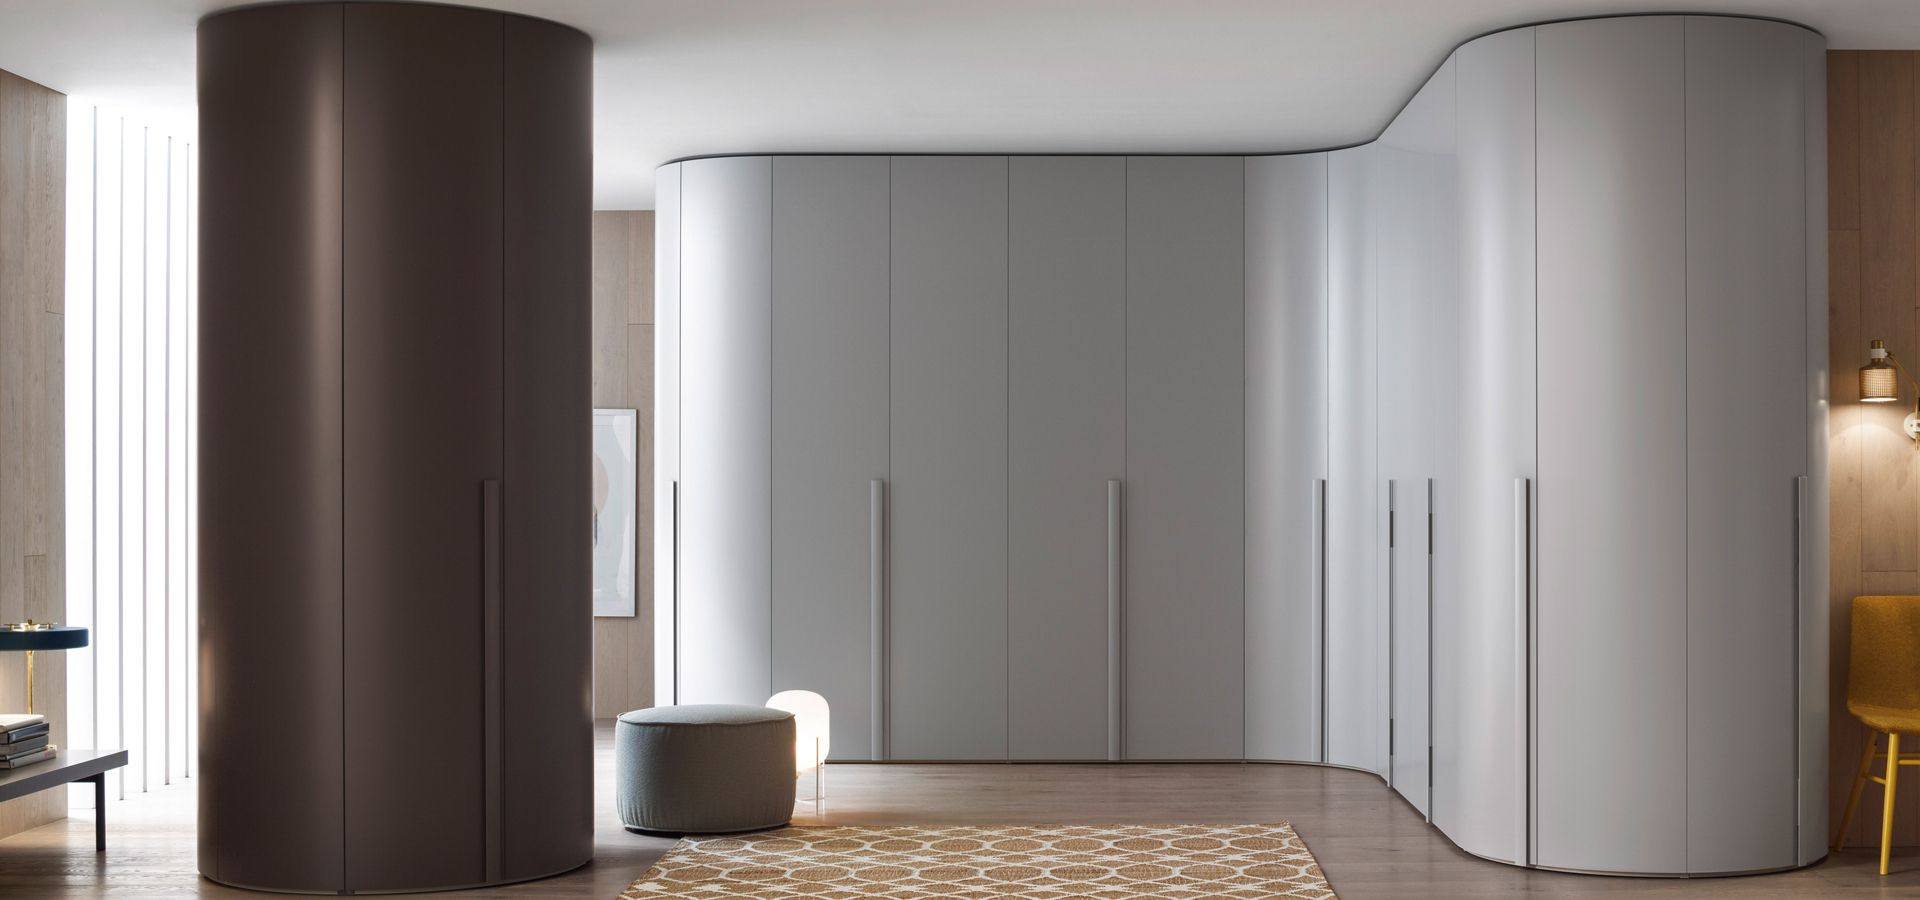 Alfa Curve – Fitted Bedroom Furniture | Wardrobes Uk | Lawrence Walsh  Furniture Within Curved Wardrobes Doors (Gallery 18 of 20)